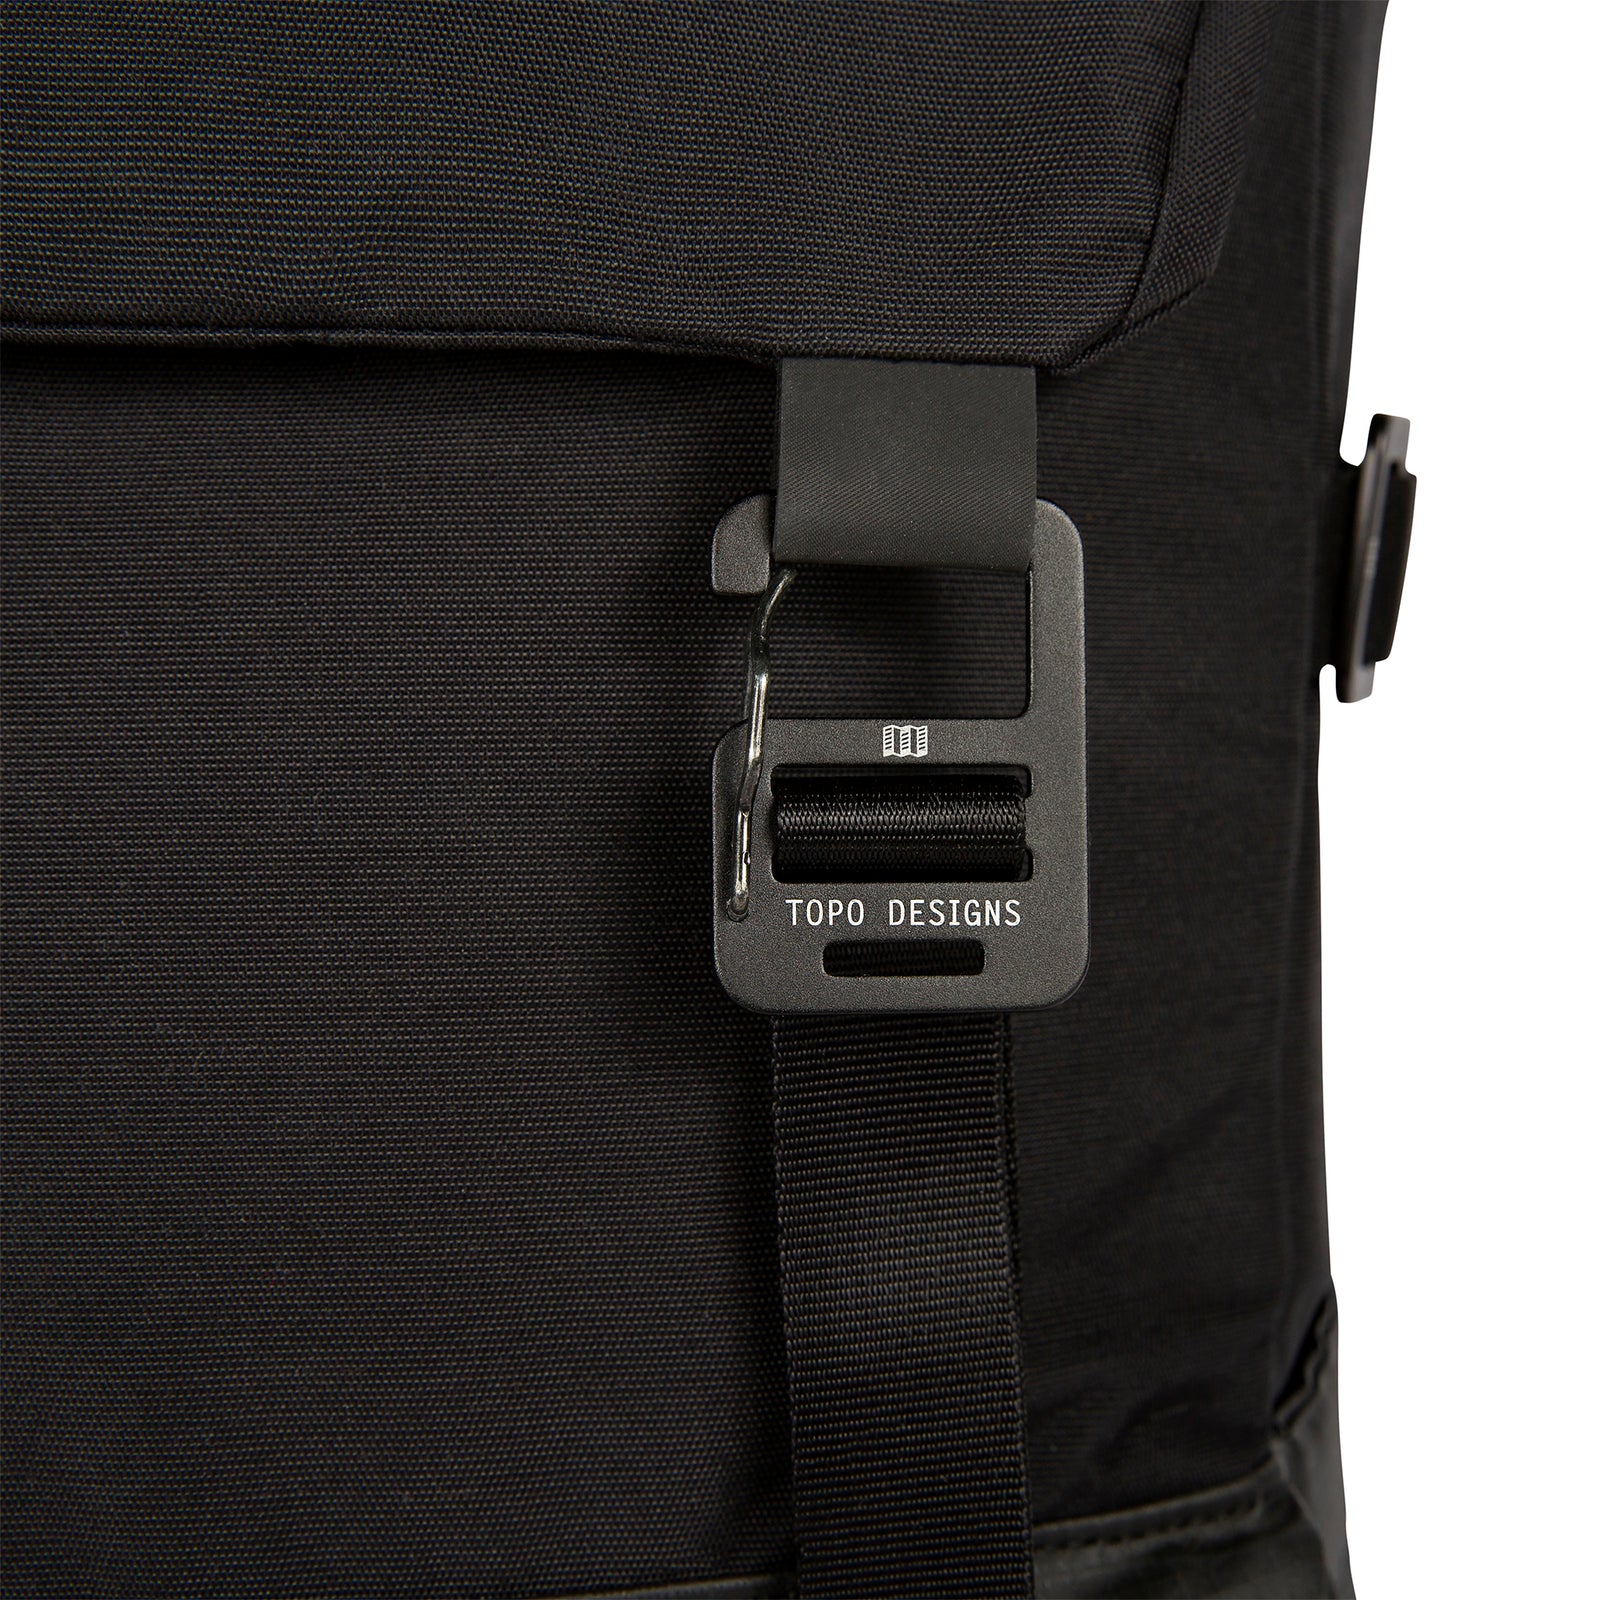 Detail Shot of the Topo Designs Rover Pack Premium showing the hardware in "Premium Black".